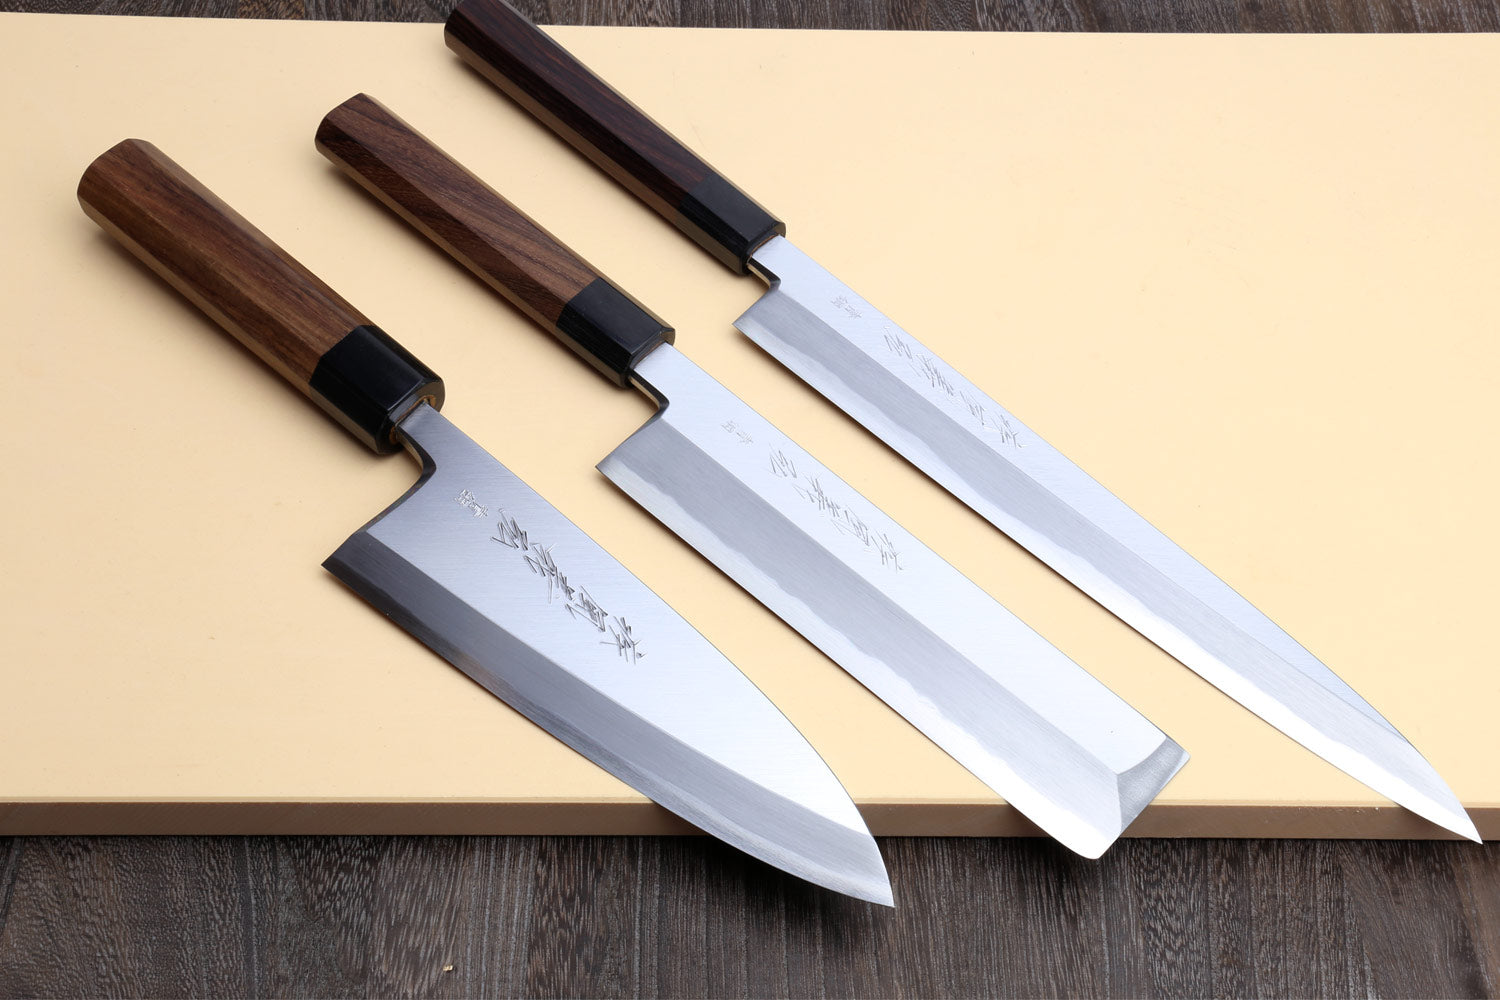 Japanese Chef Knives, Tableware, Kitchenware and Restaurant Supplies